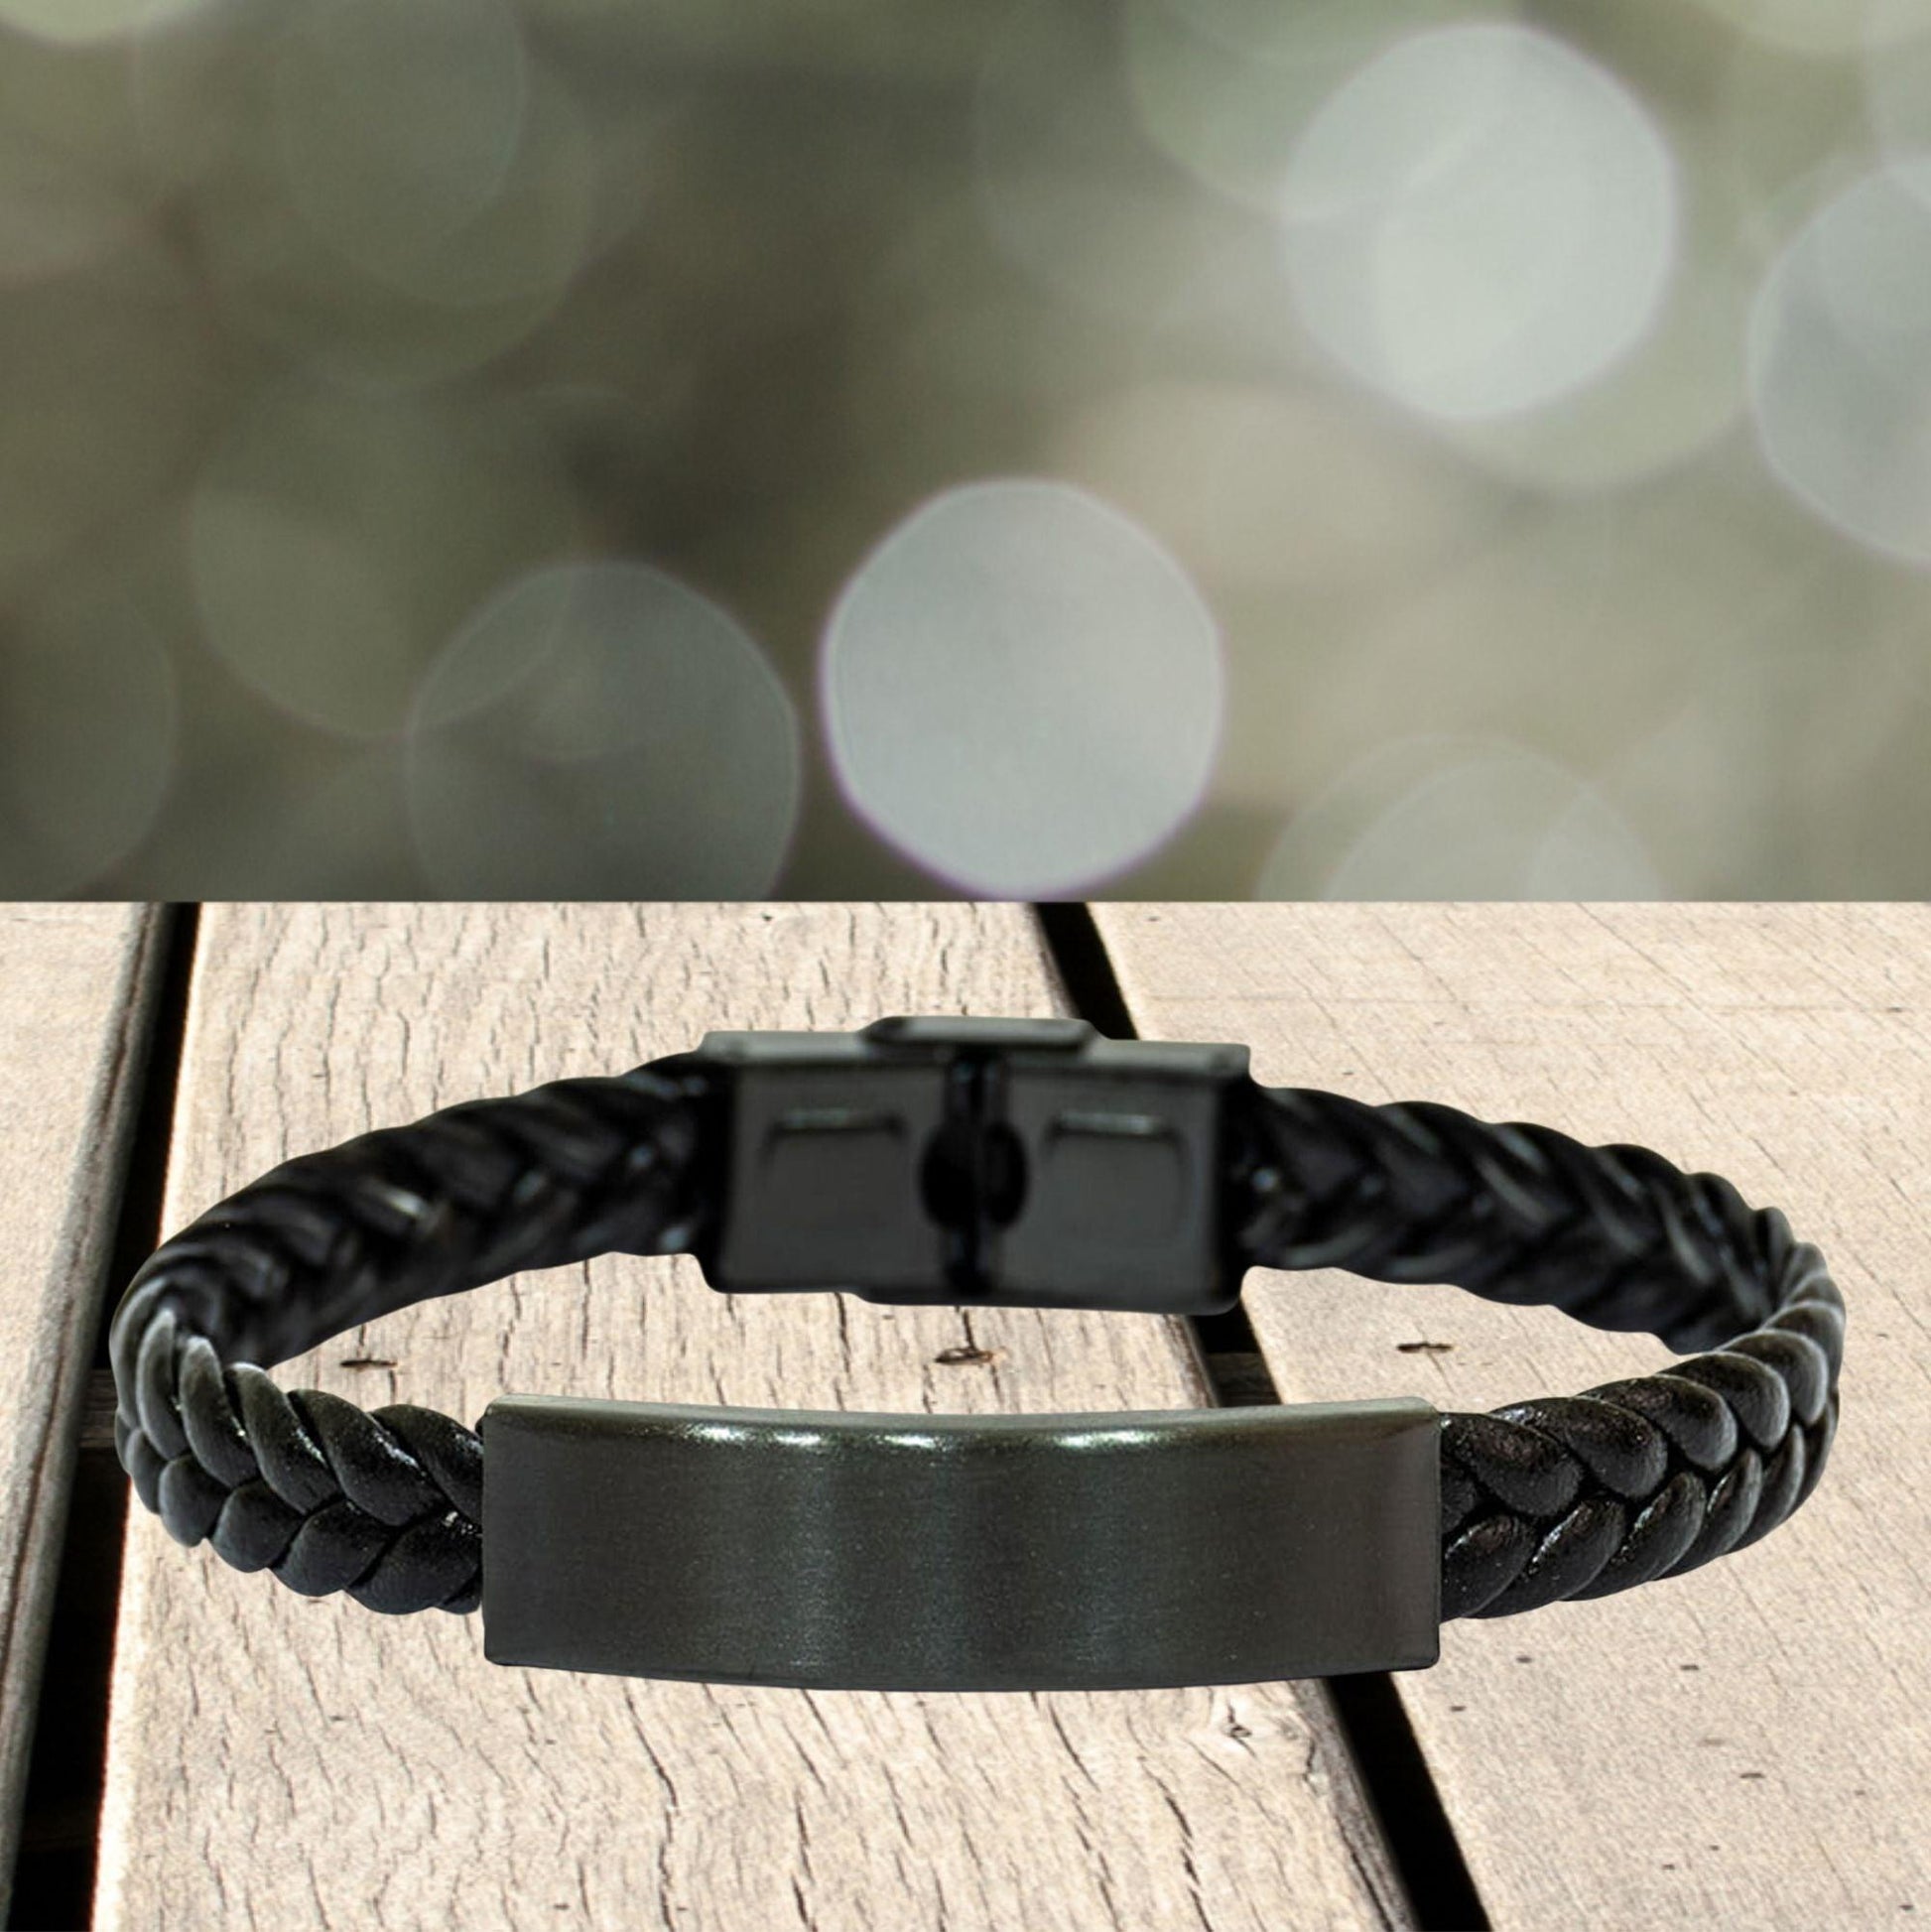 Remarkable Fabricator Gifts, Your dedication and hard work, Inspirational Birthday Christmas Unique Braided Leather Bracelet For Fabricator, Coworkers, Men, Women, Friends - Mallard Moon Gift Shop